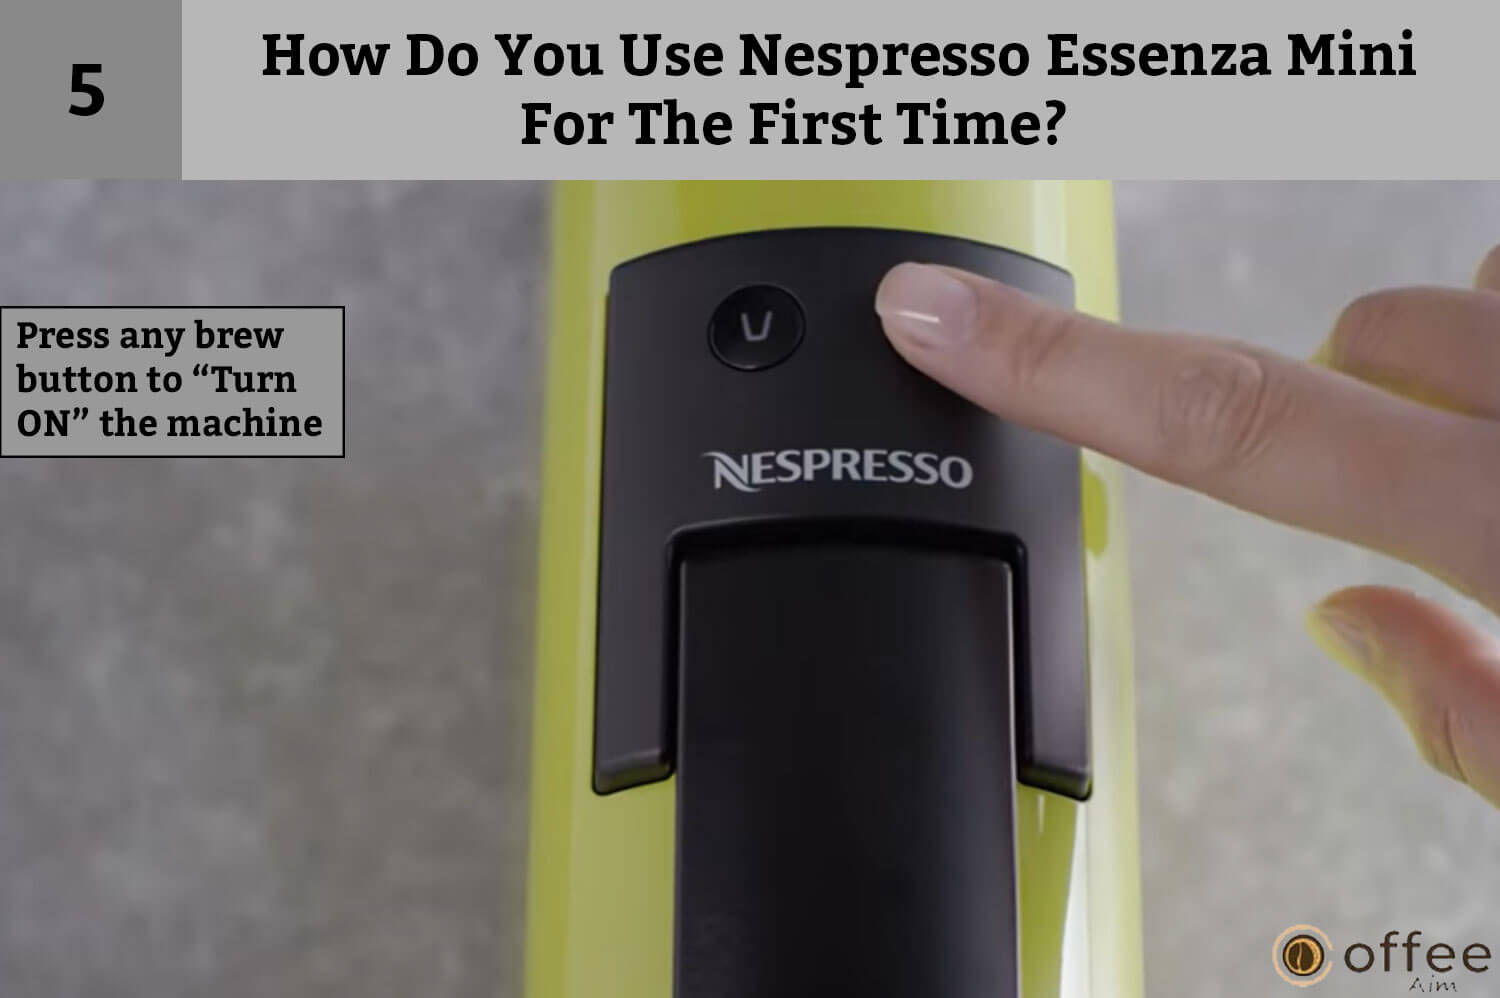 Fifth instruction of How Do You Use Nespresso Essenza Mini For The First Time? is Press any brew button to "Turn On" the machine.